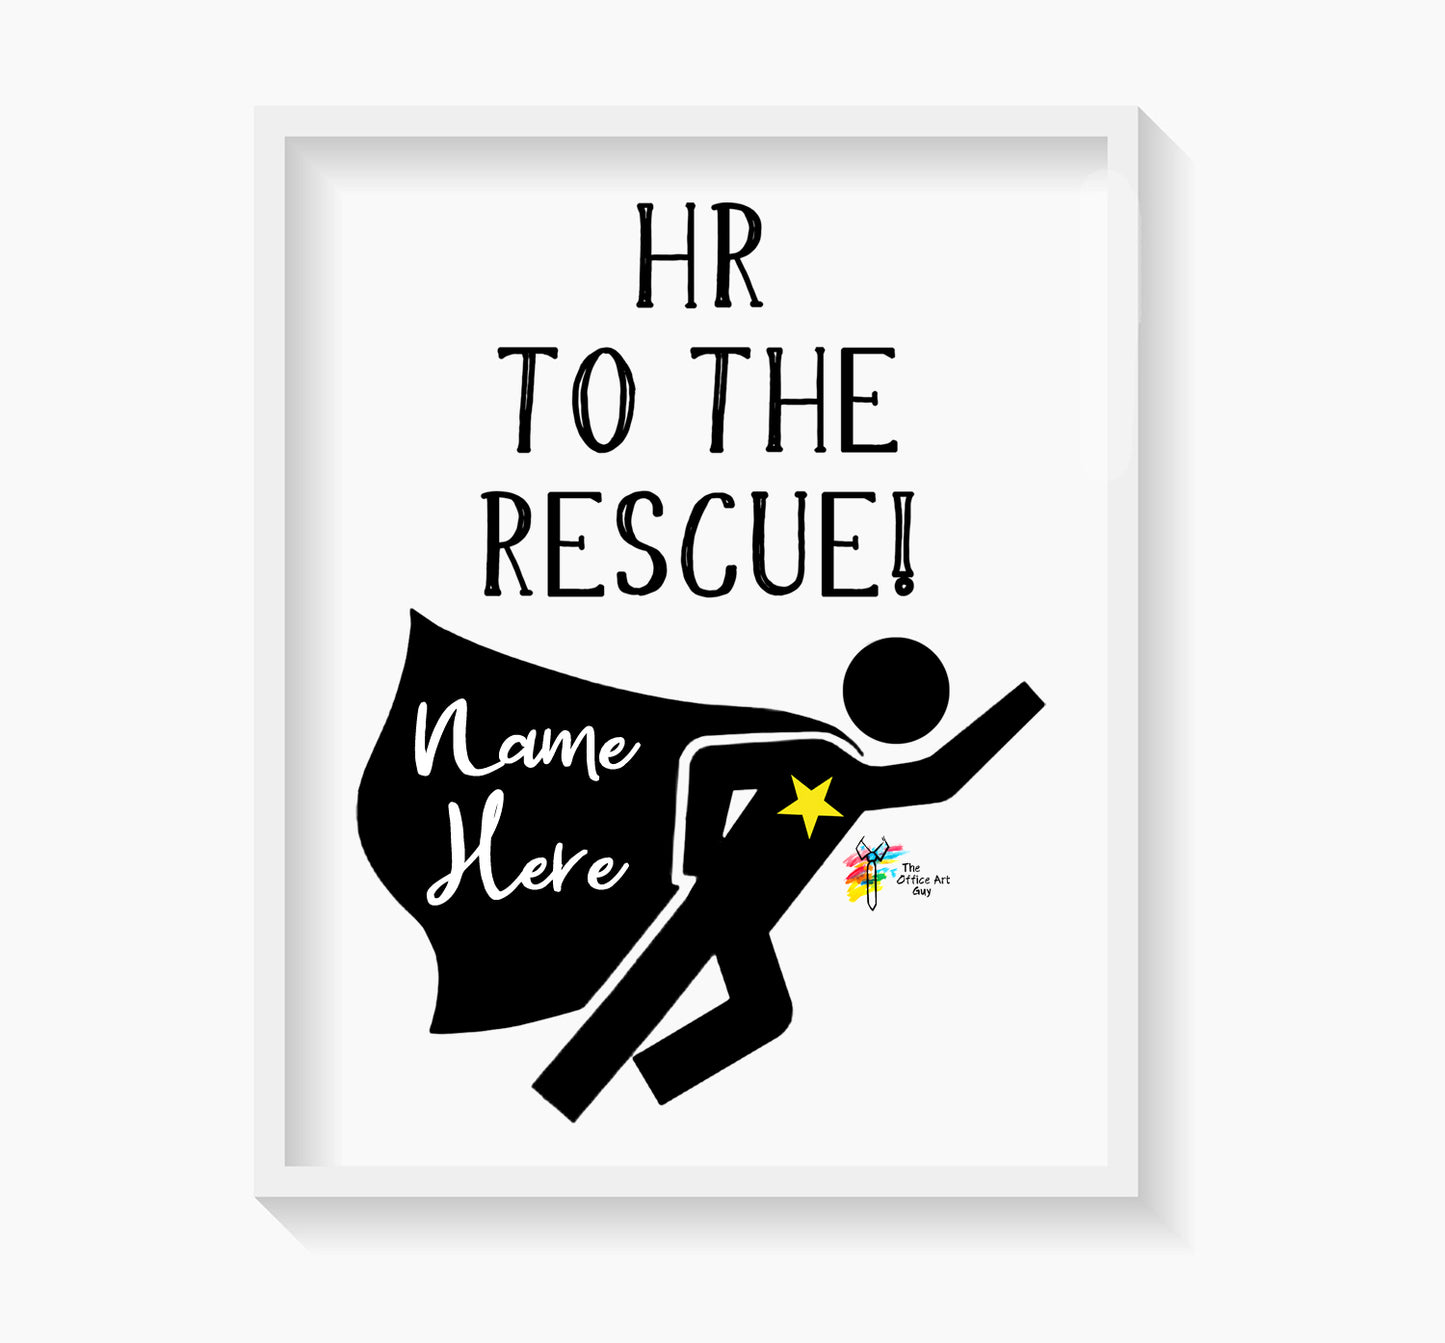 Human Resources Wall Art Superhero Personalized Gift by The Office Art Guy